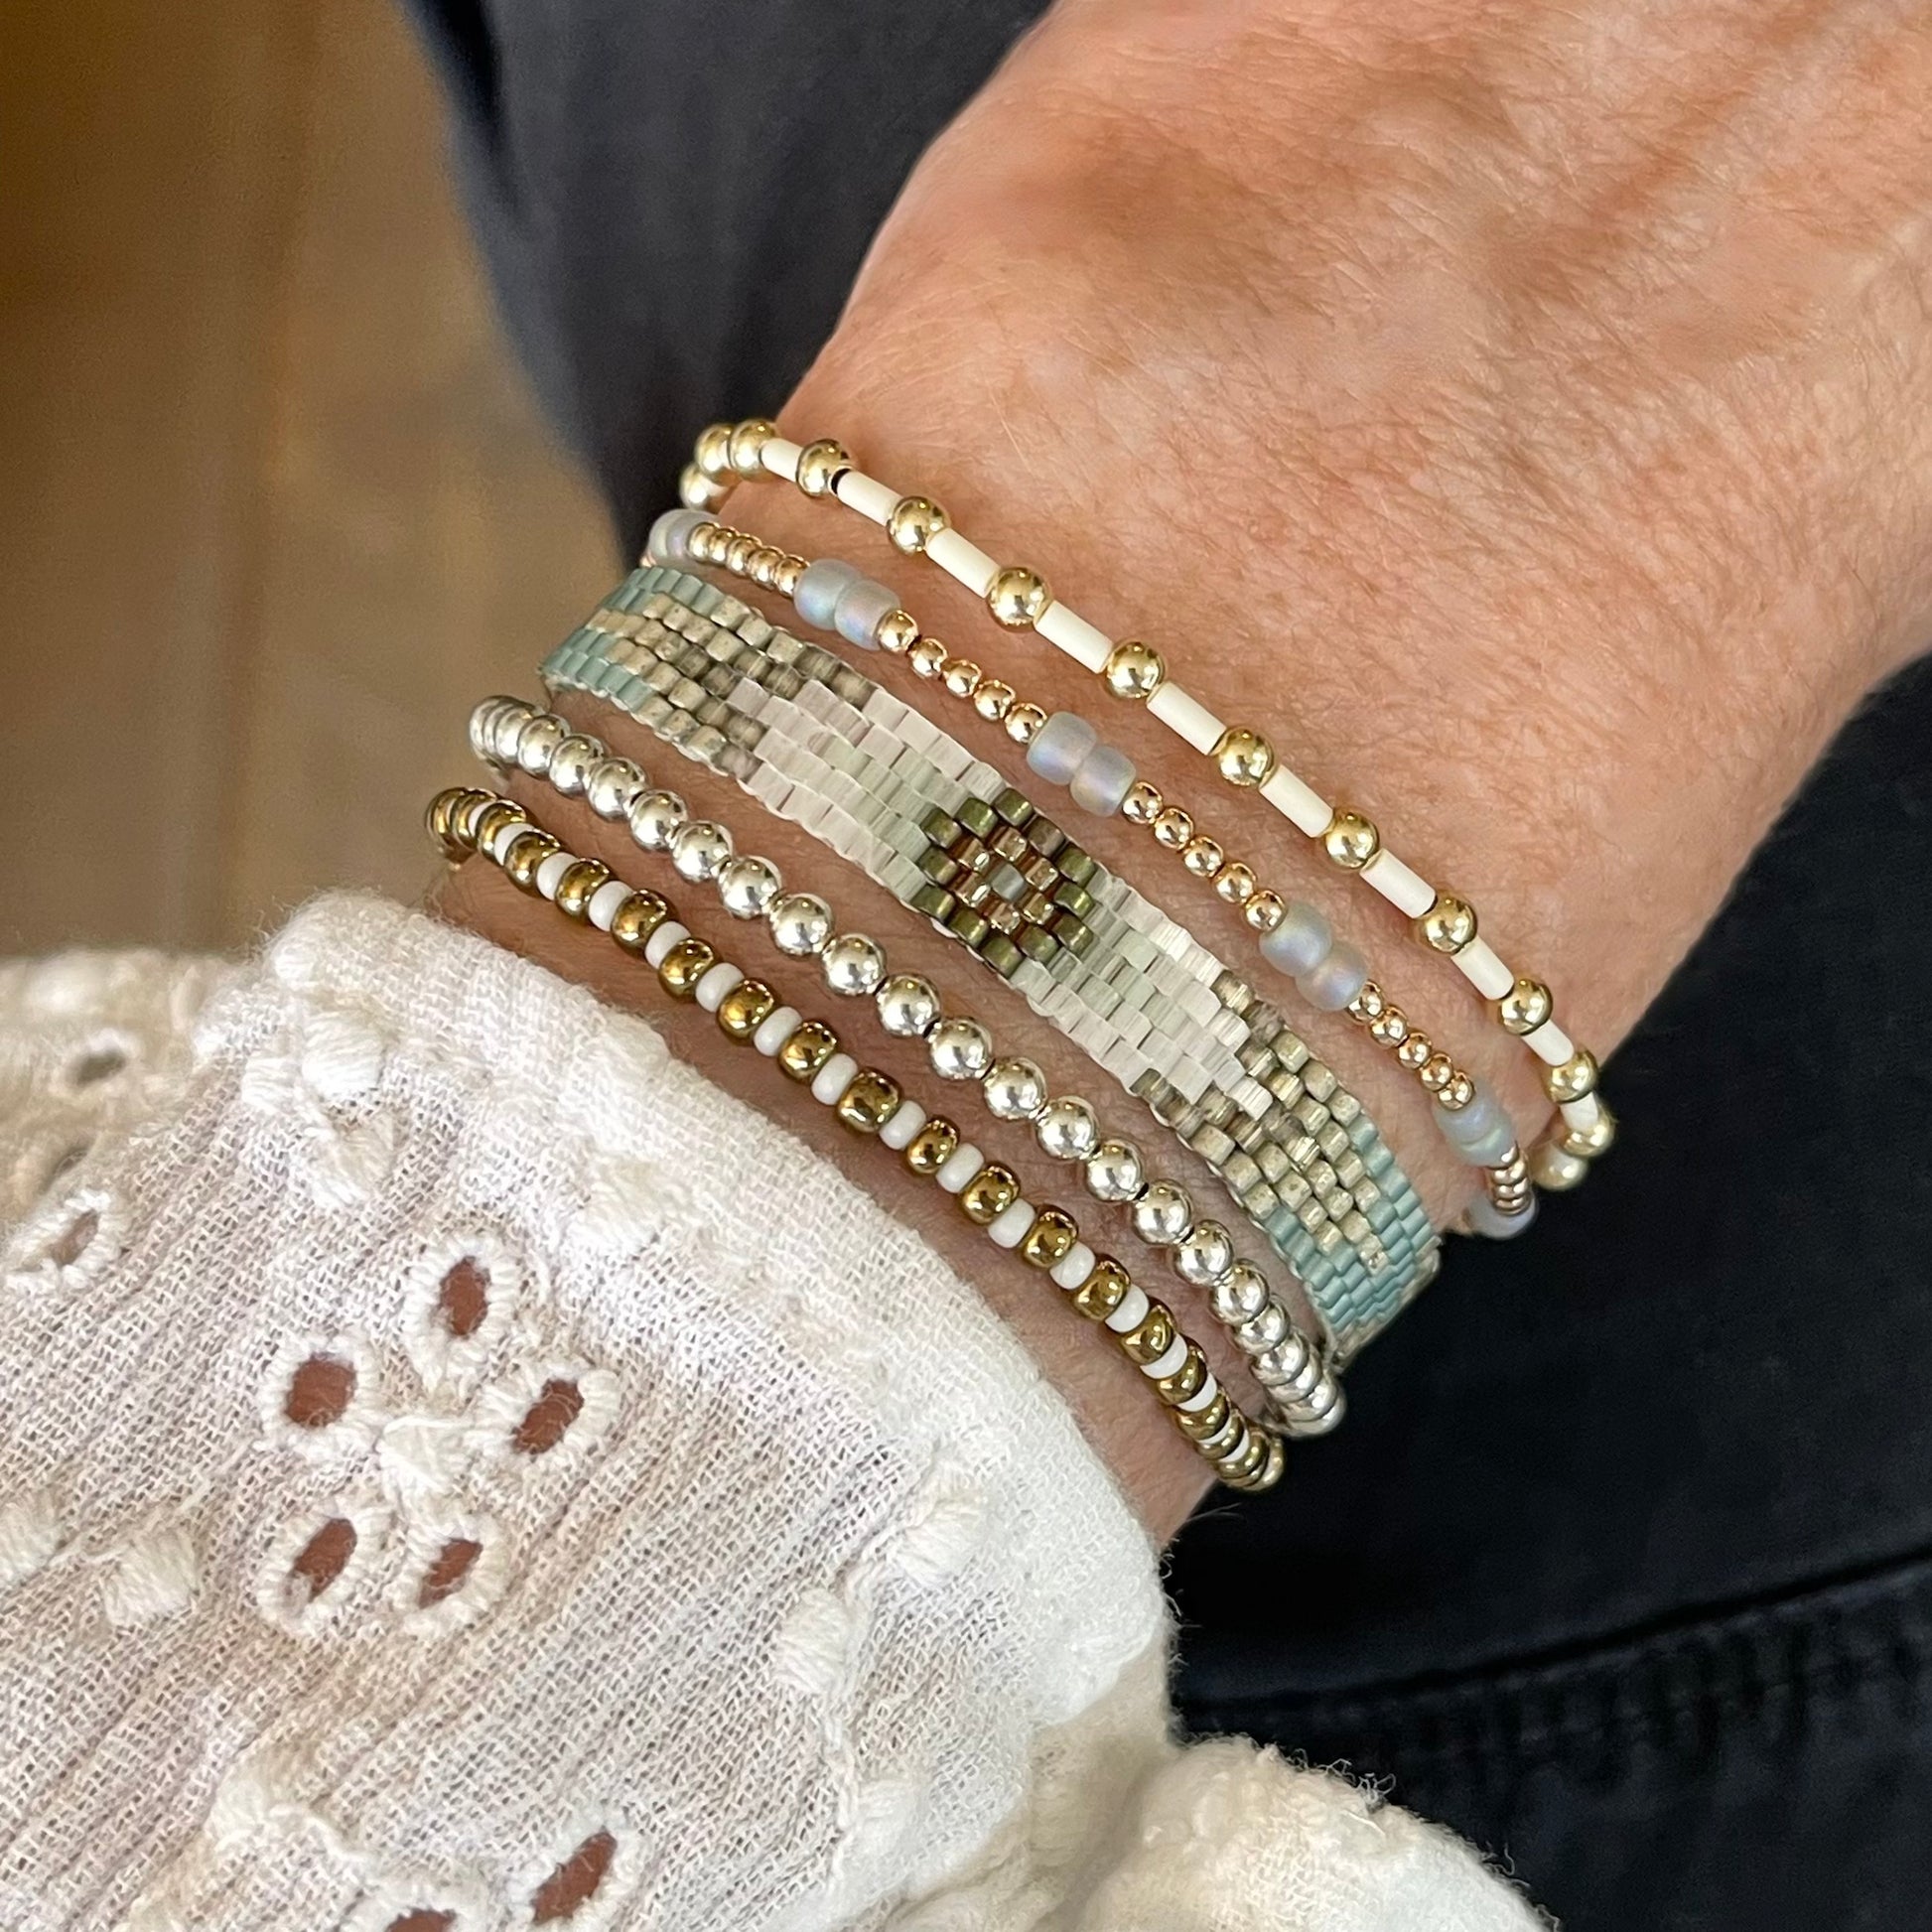 Mixed metal bracelet stack with 14K gold filled, sterling silver, bronze & ivory beads with a green woven cuff bead peyote bracelet.